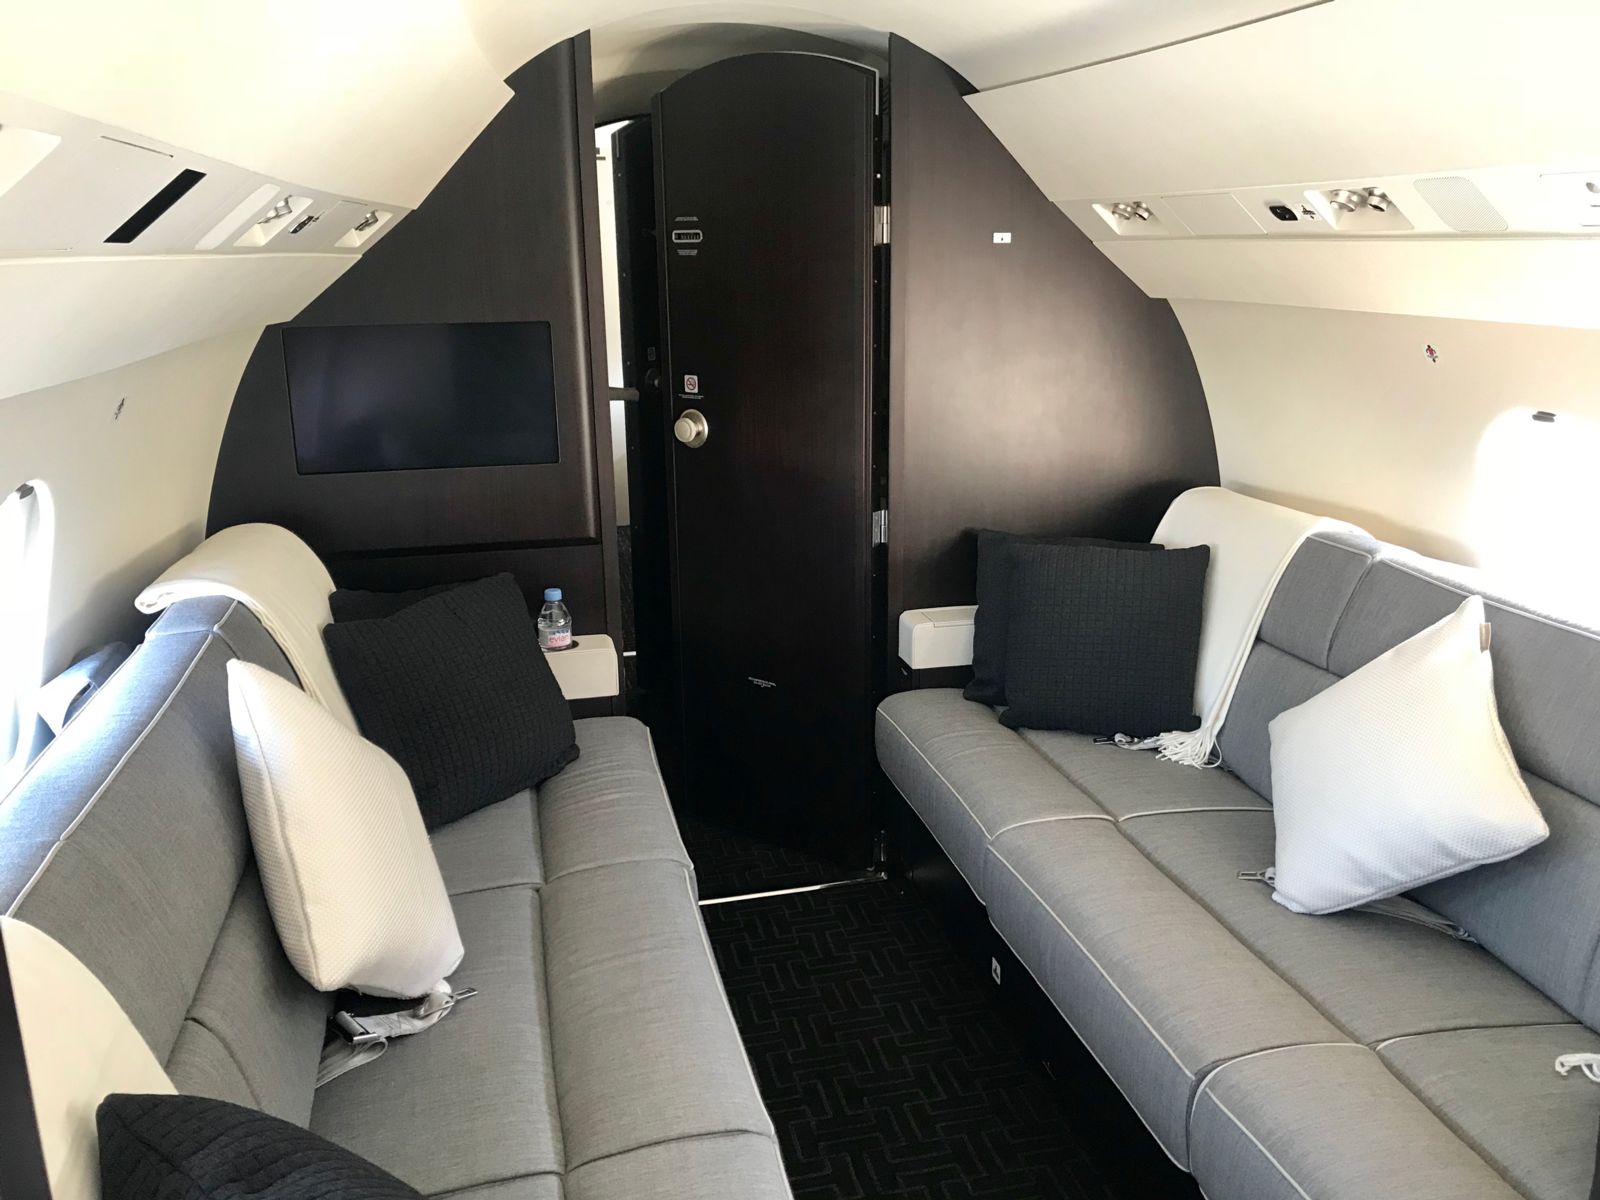 Dassault Falcon 900LX gallery image /userfiles/images/F900LX%20SN%20288/rear%20cabin.jpg